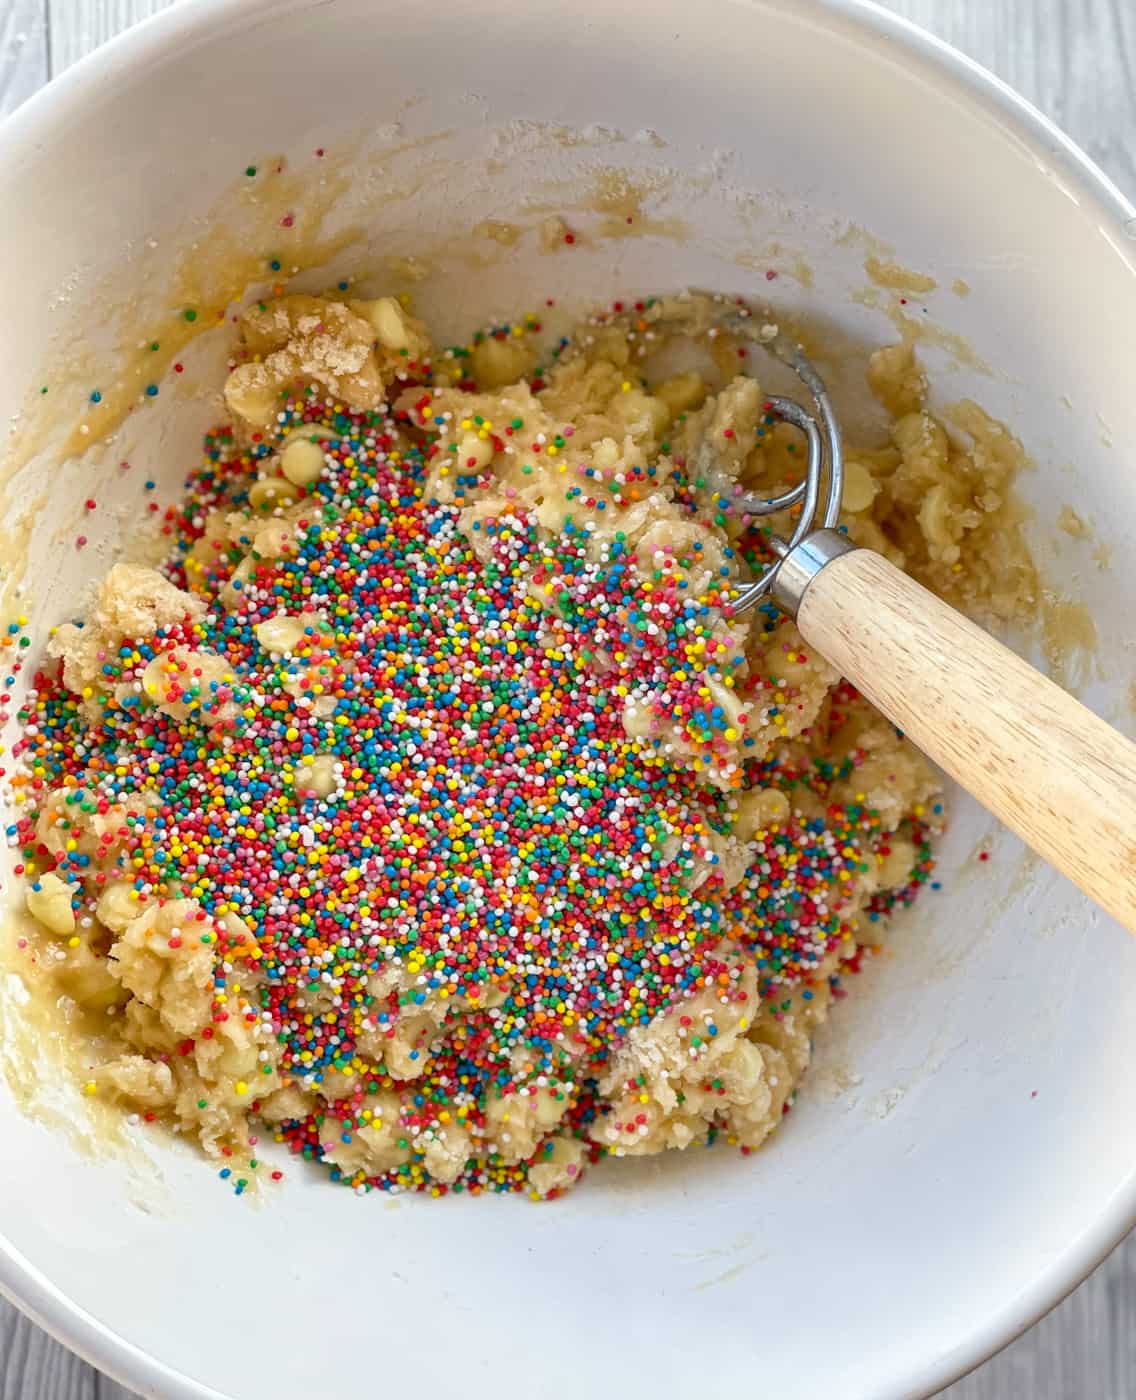 Adding sprinkles or 100s and 1000s to the cake mix cookie batter